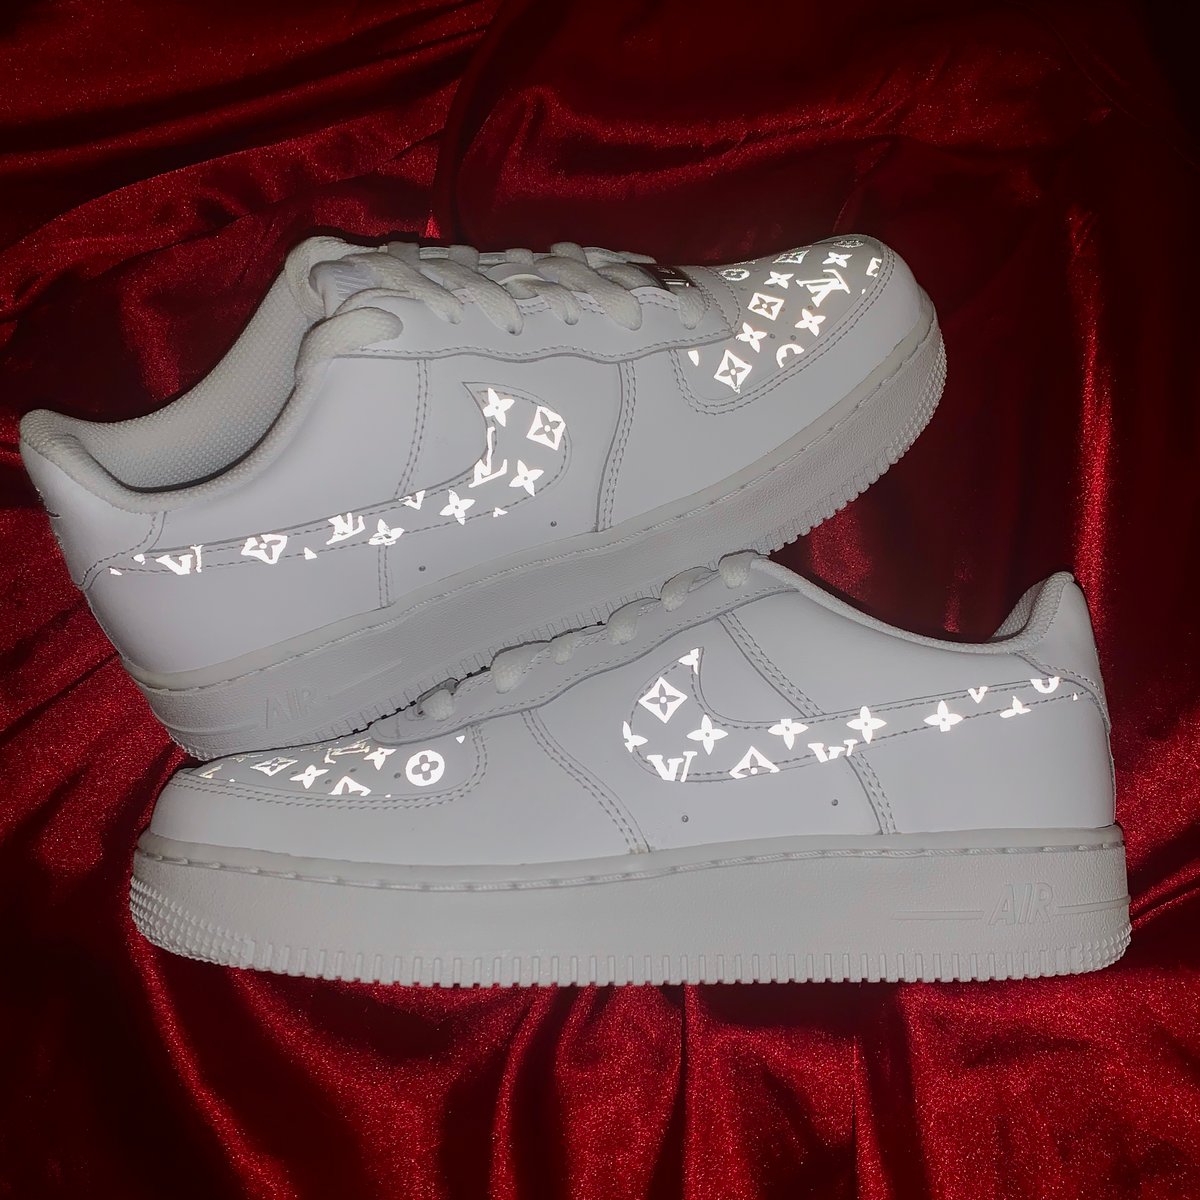 Reflective LV X Nike Airforce1s | customs by saami